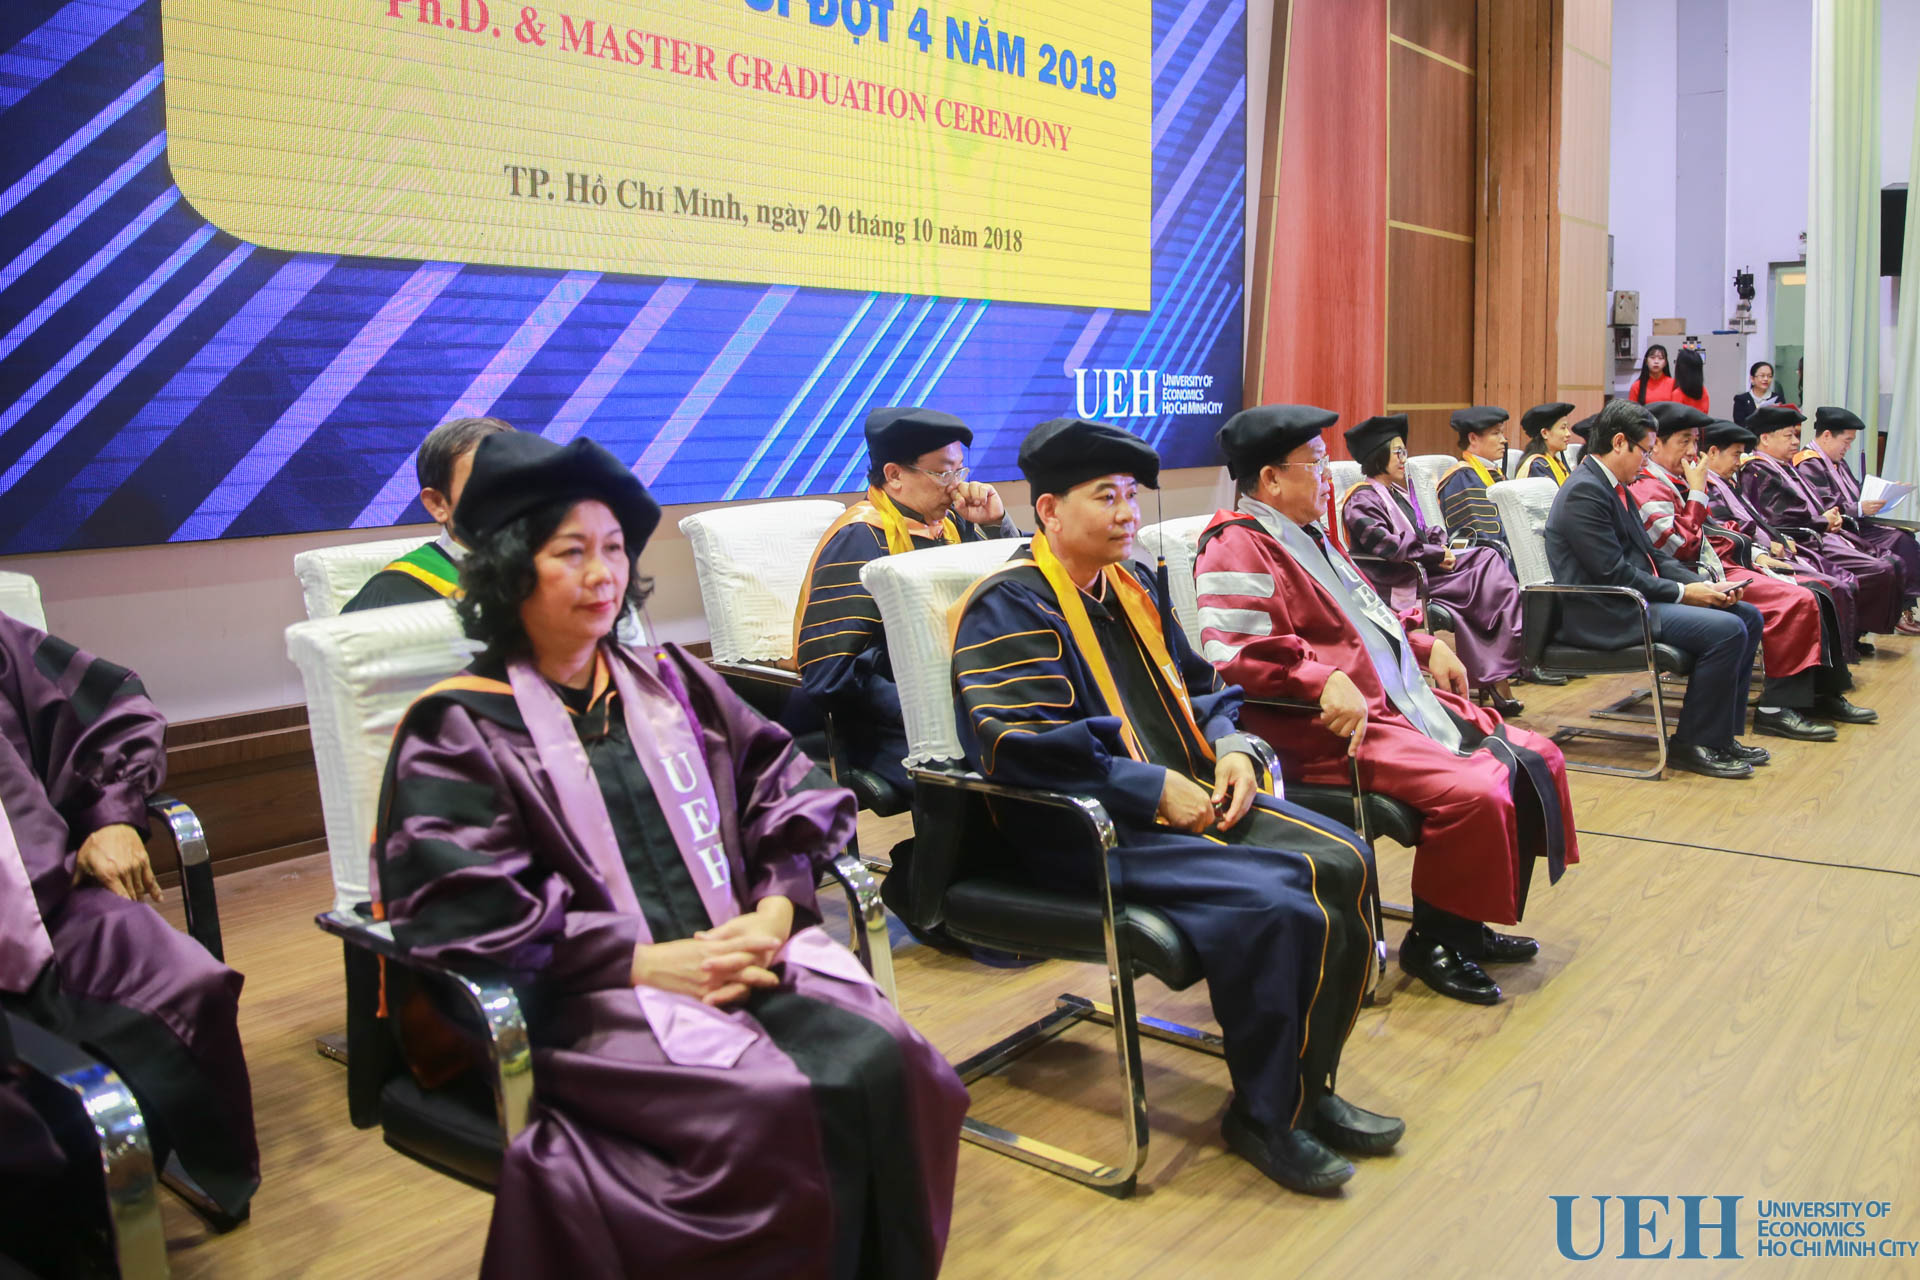 Assoc.Prof. Liem Viet Ngo (UNSW) was awarded an Honorary Doctor of Economics from the University of Economics Ho Chi Minh City (UEH)